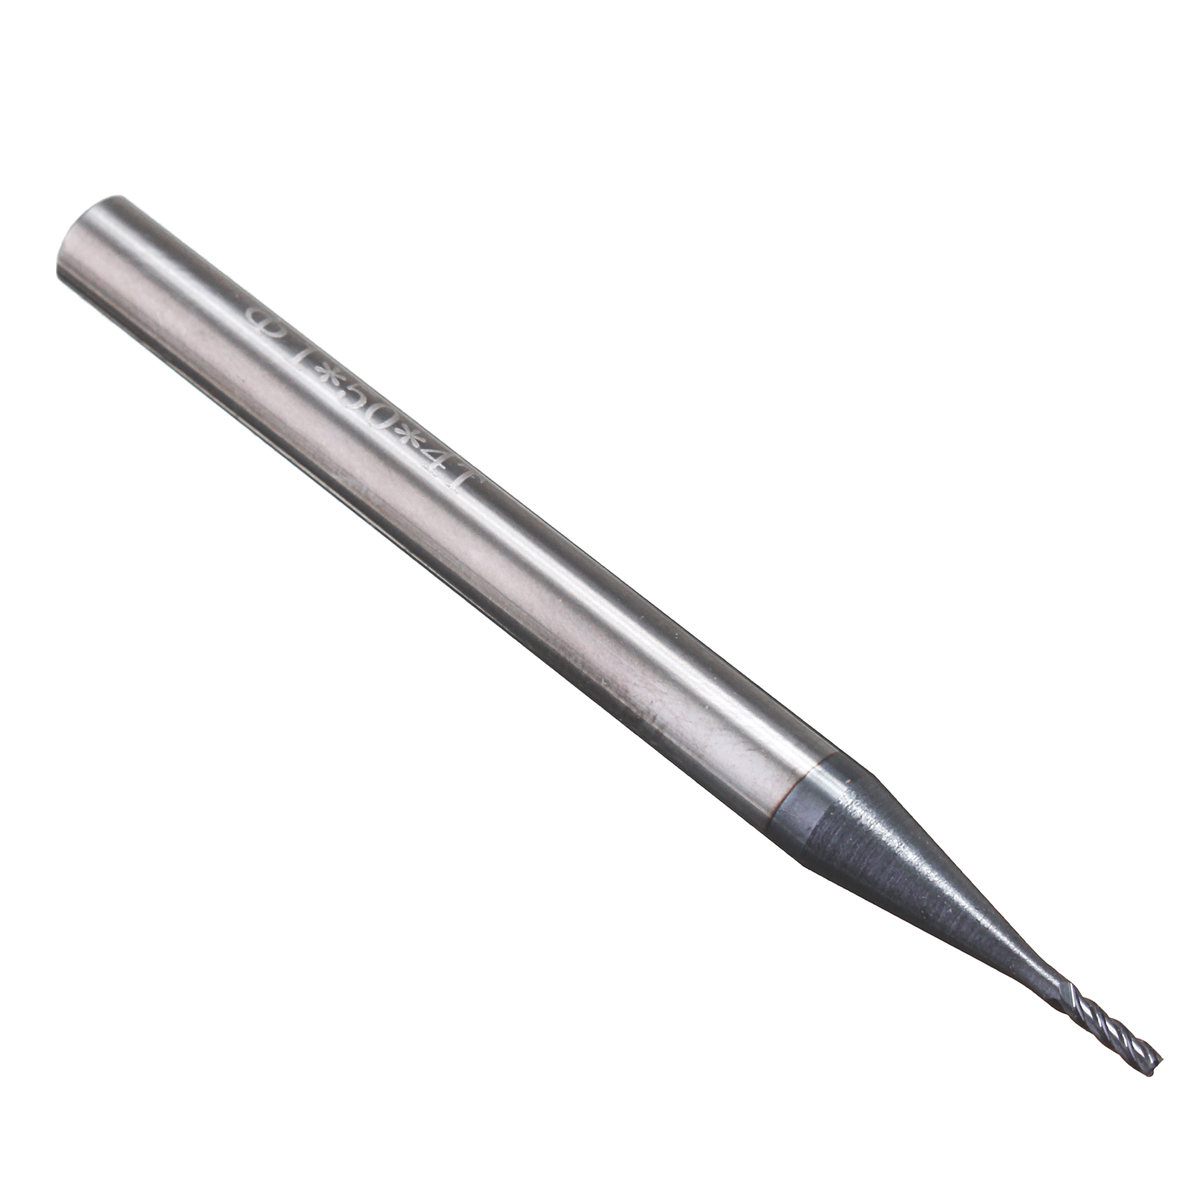 Drillpro-1mm-4-Flutes-End-Mill-Cutter-50mm-Length-Tungsten-Carbide-Milling-Cutter-CNC-Tool-1516233-4